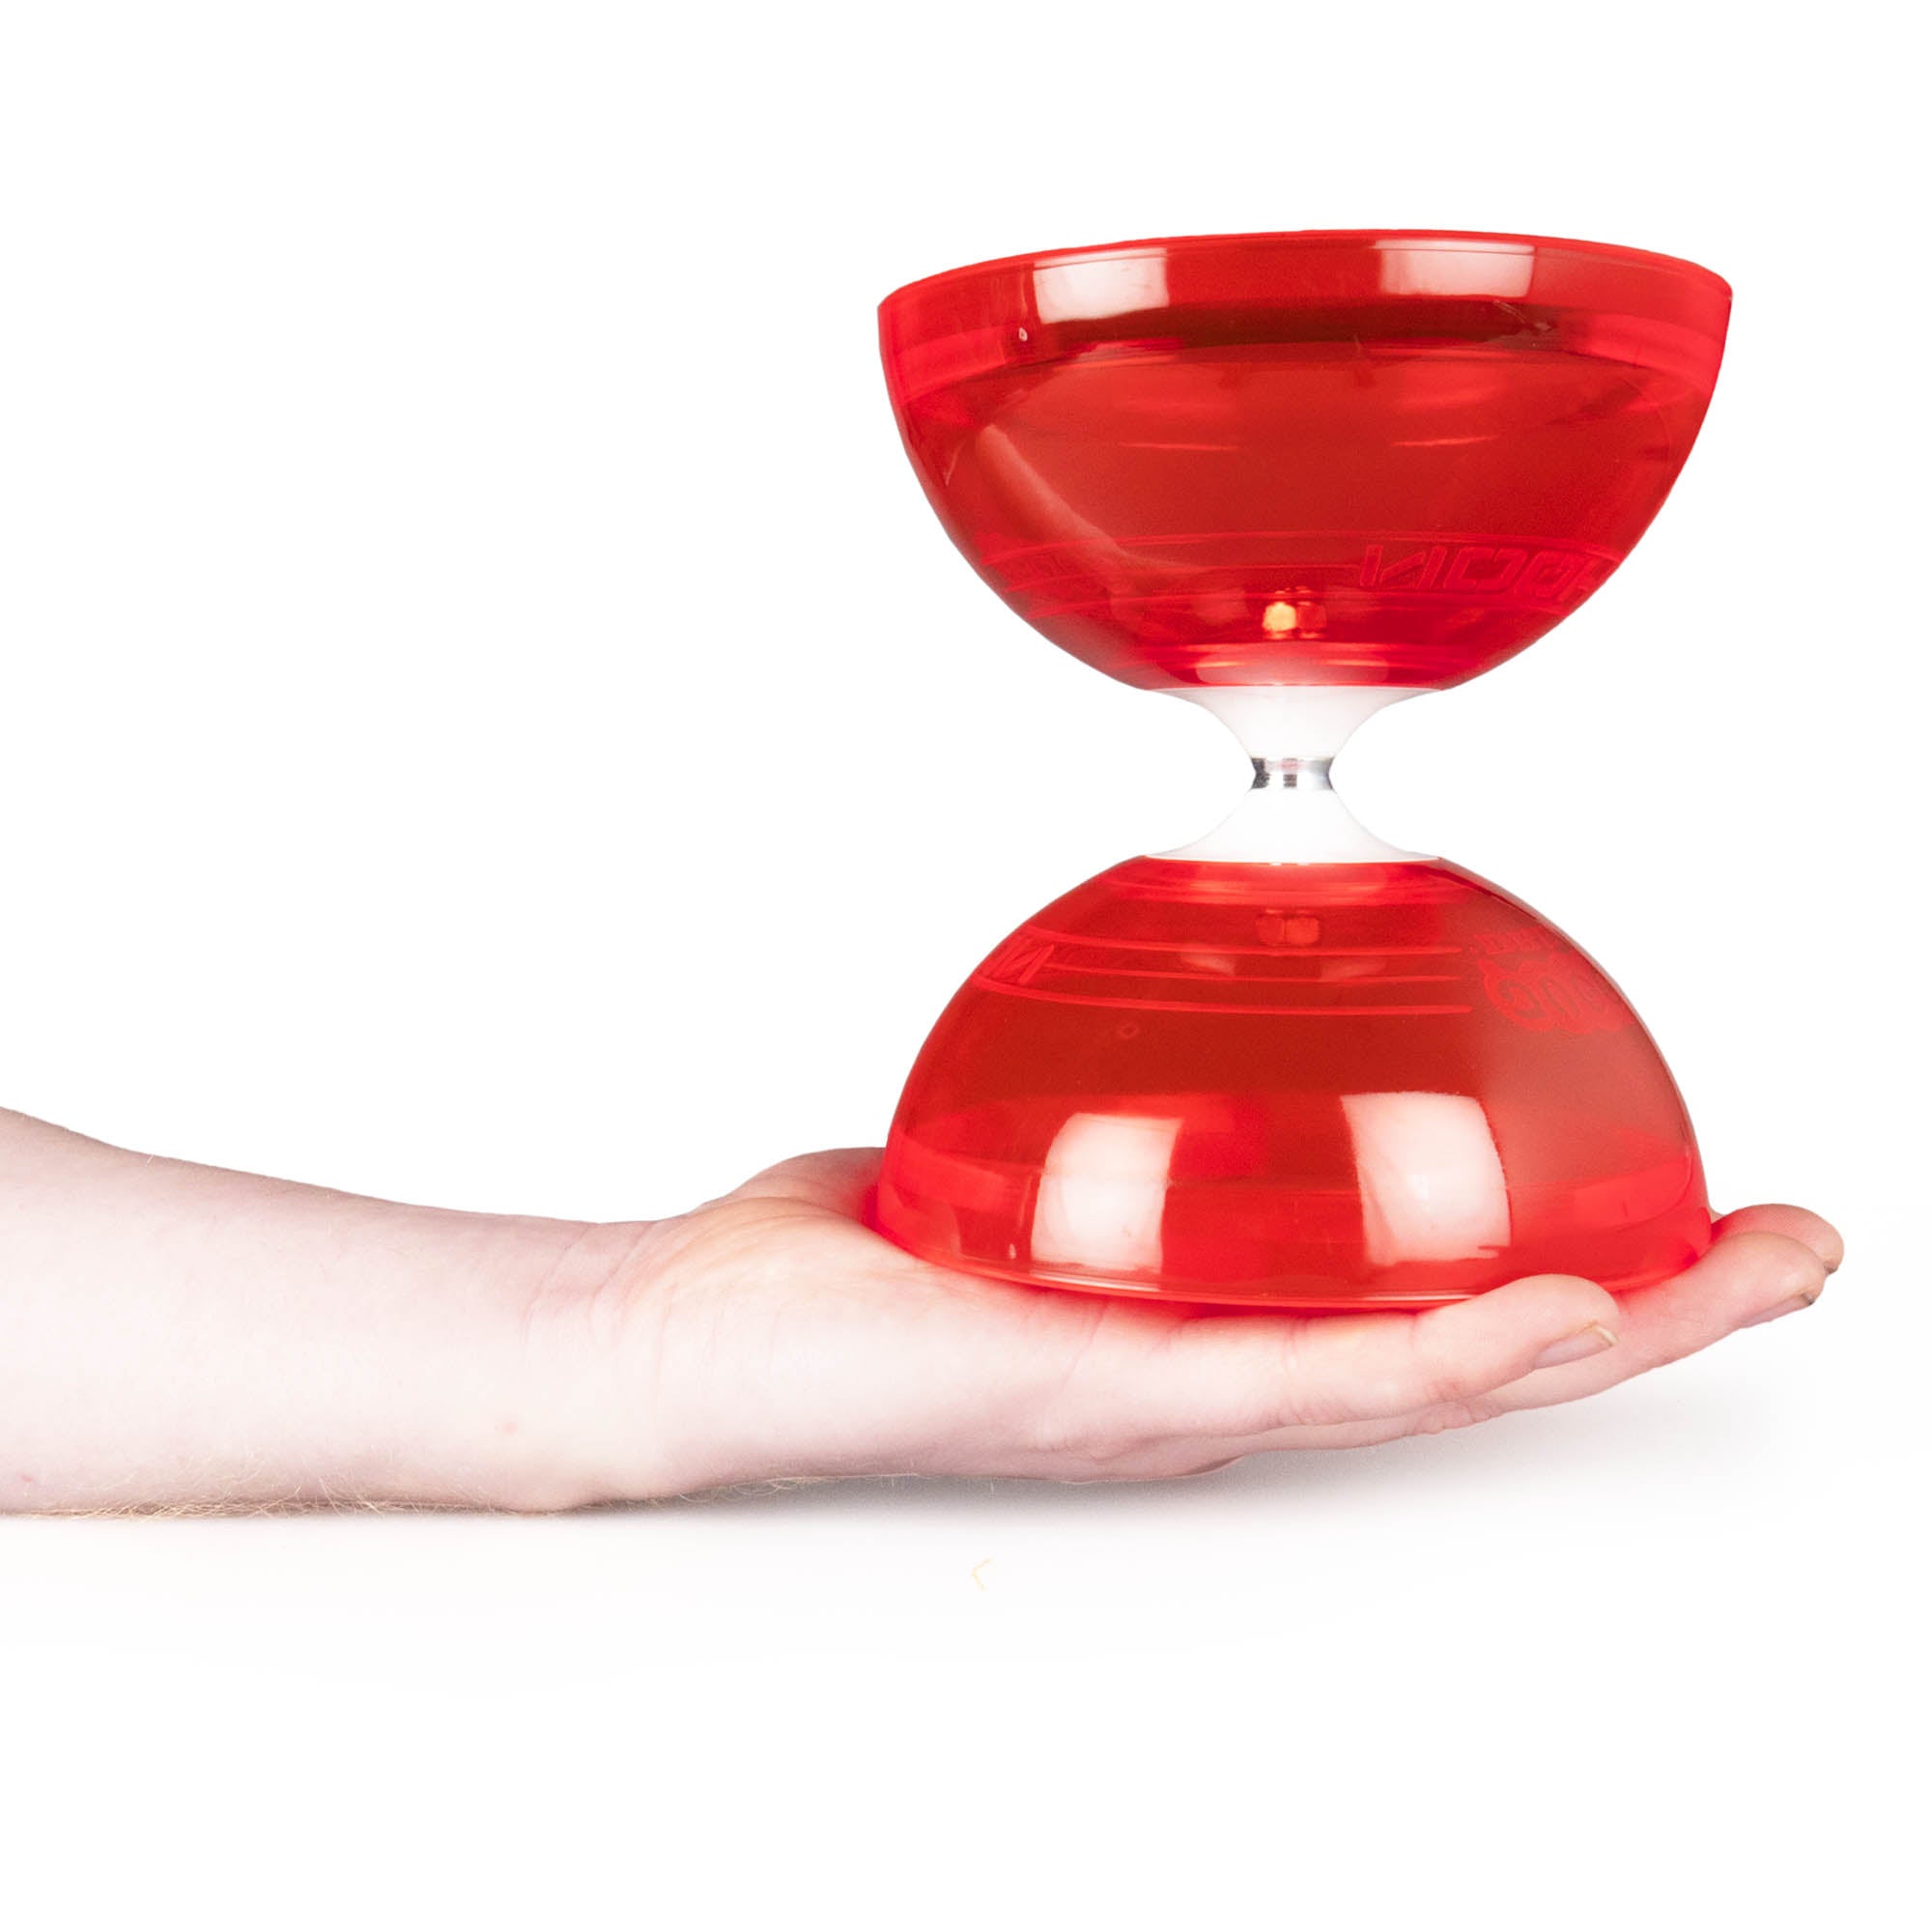 Juggle dream typhoon red in hand